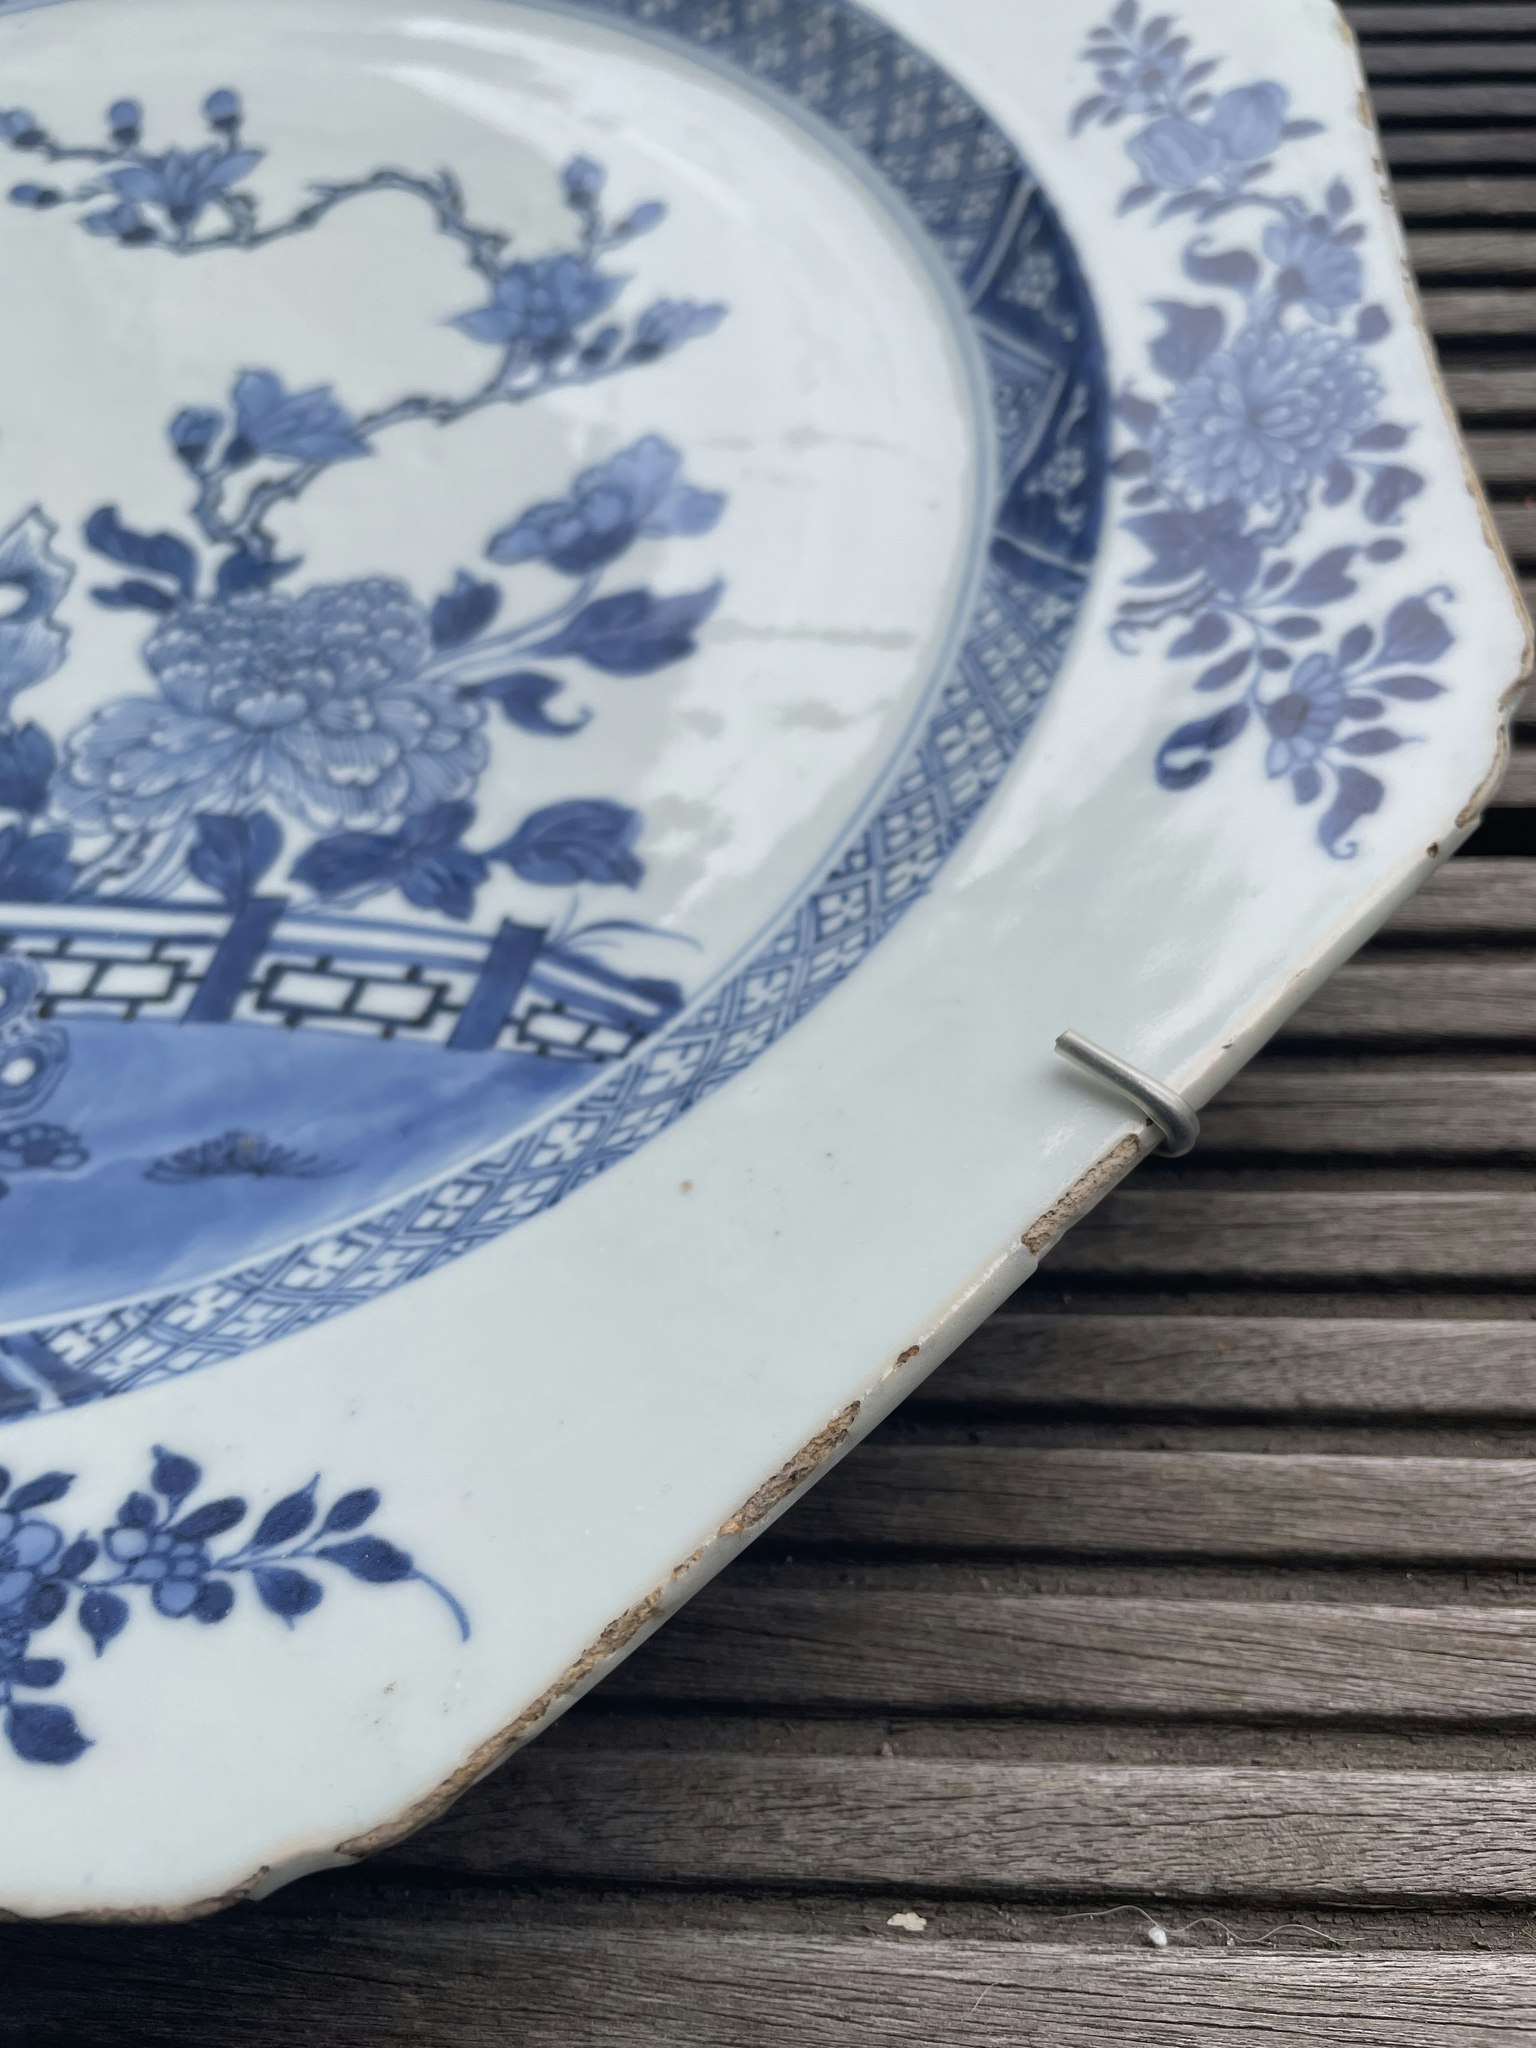 Antique Chinese Export Blue and White Porcelain charger, Qianlong period #705